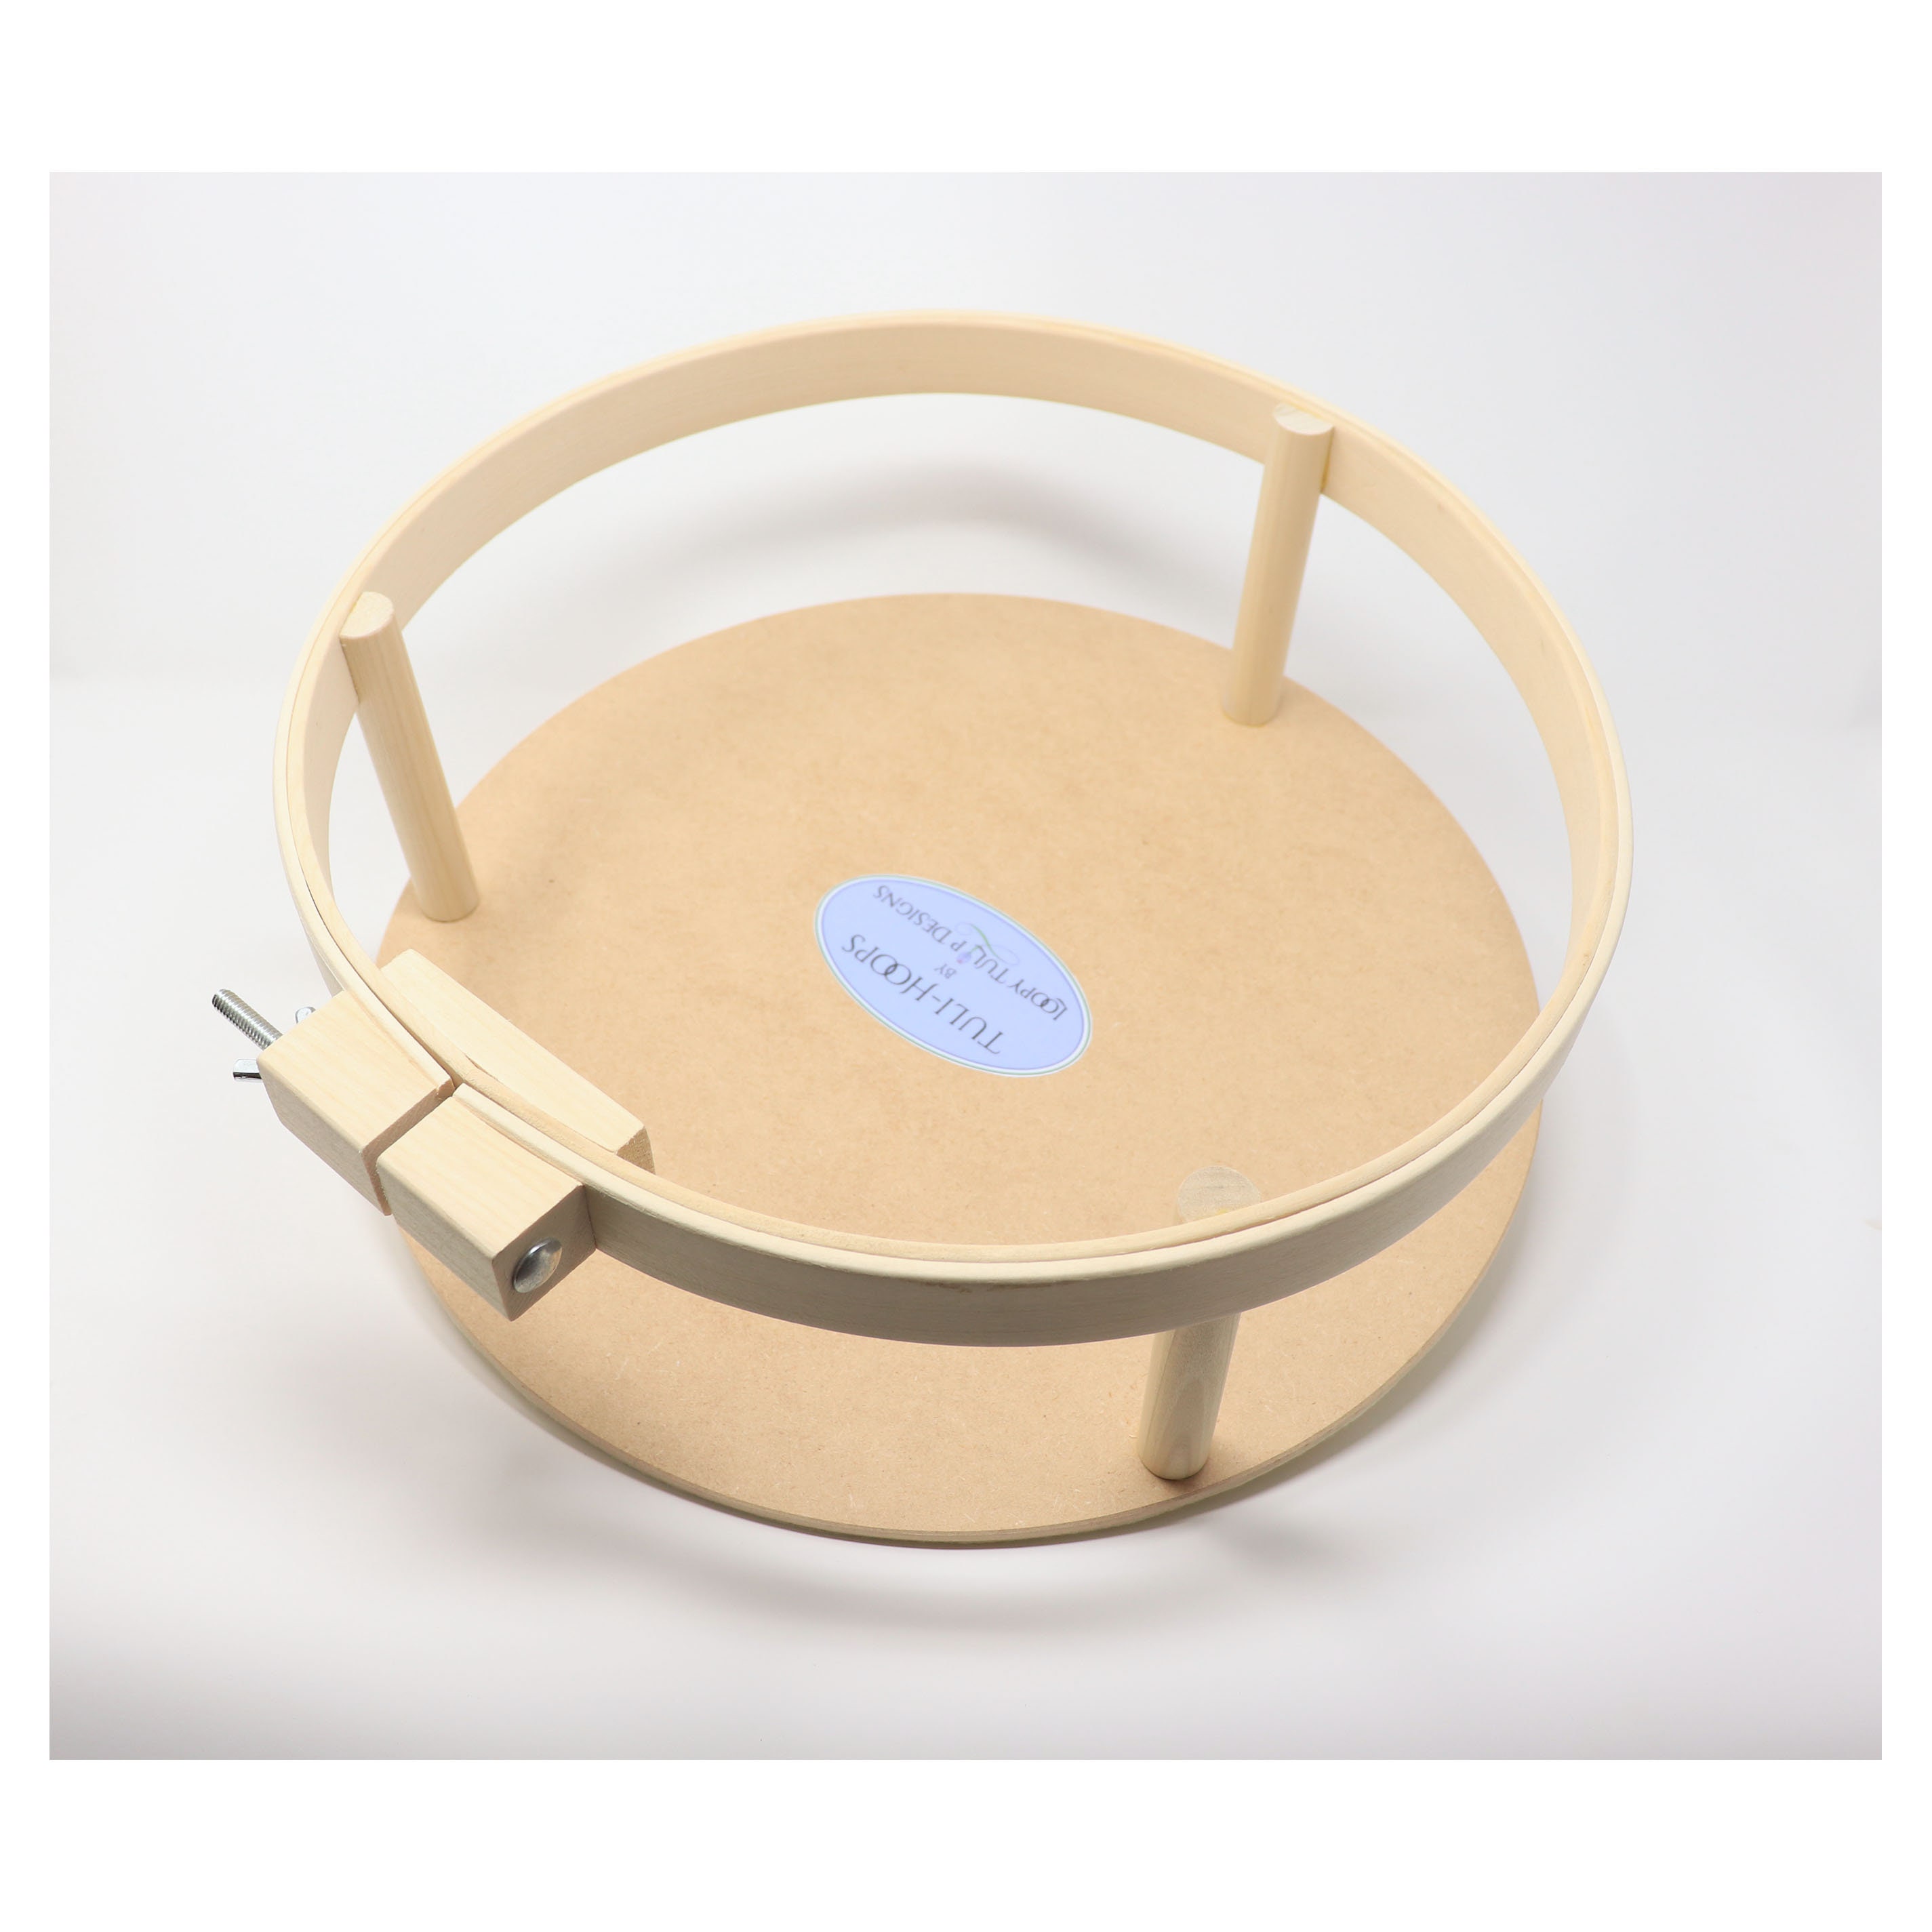 lap quilting hoop products for sale